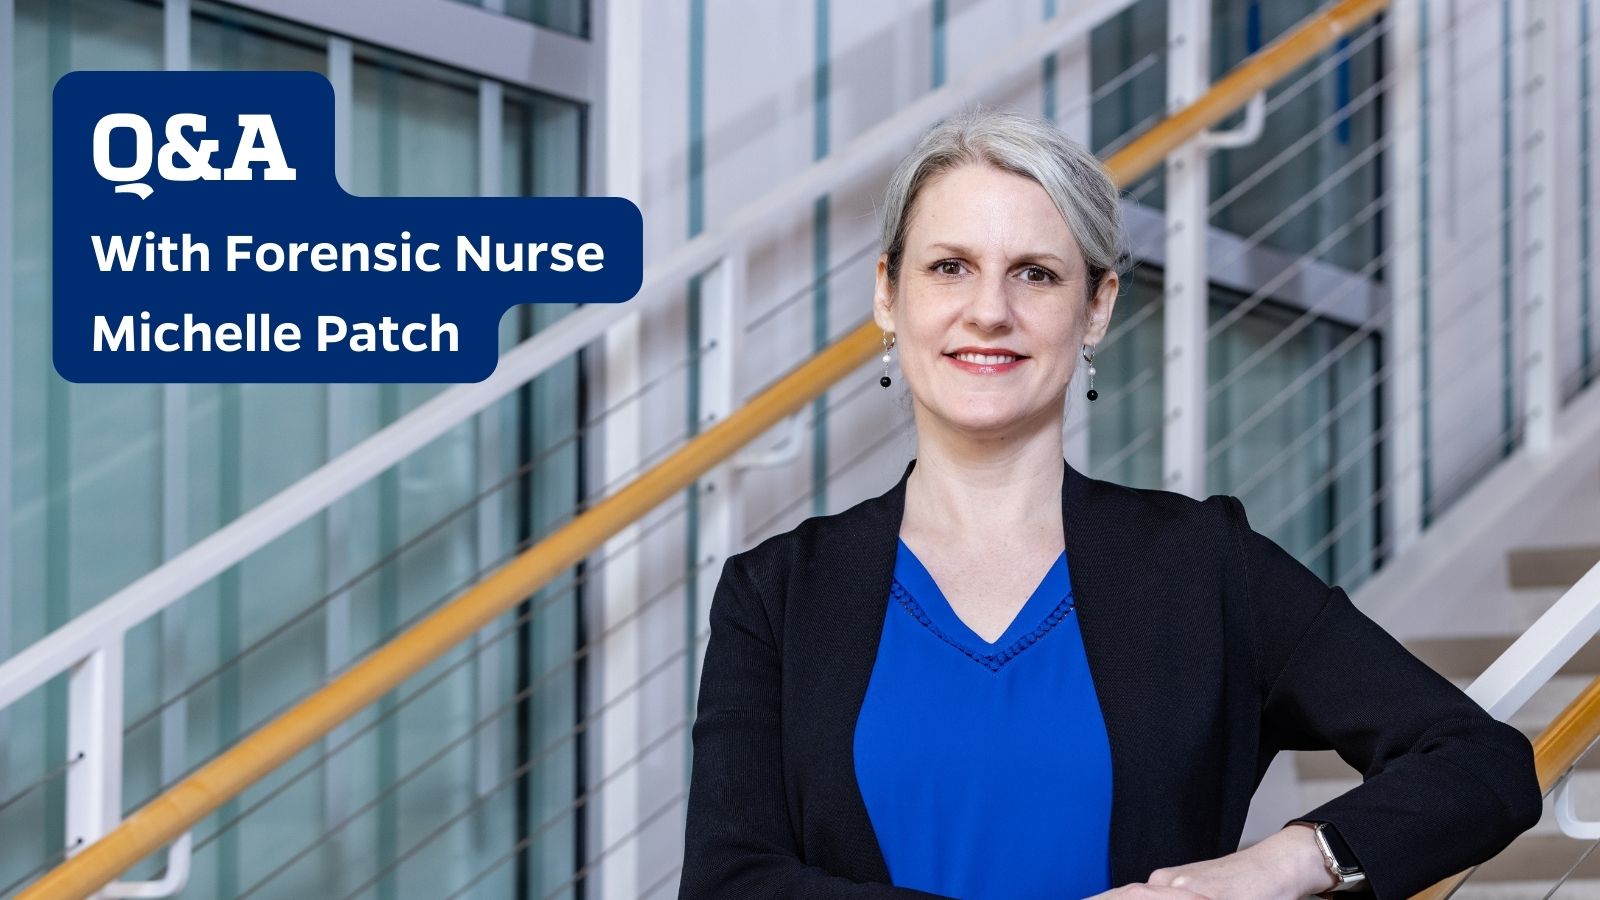 Q & A With Forensic Nurse, Michelle Patch